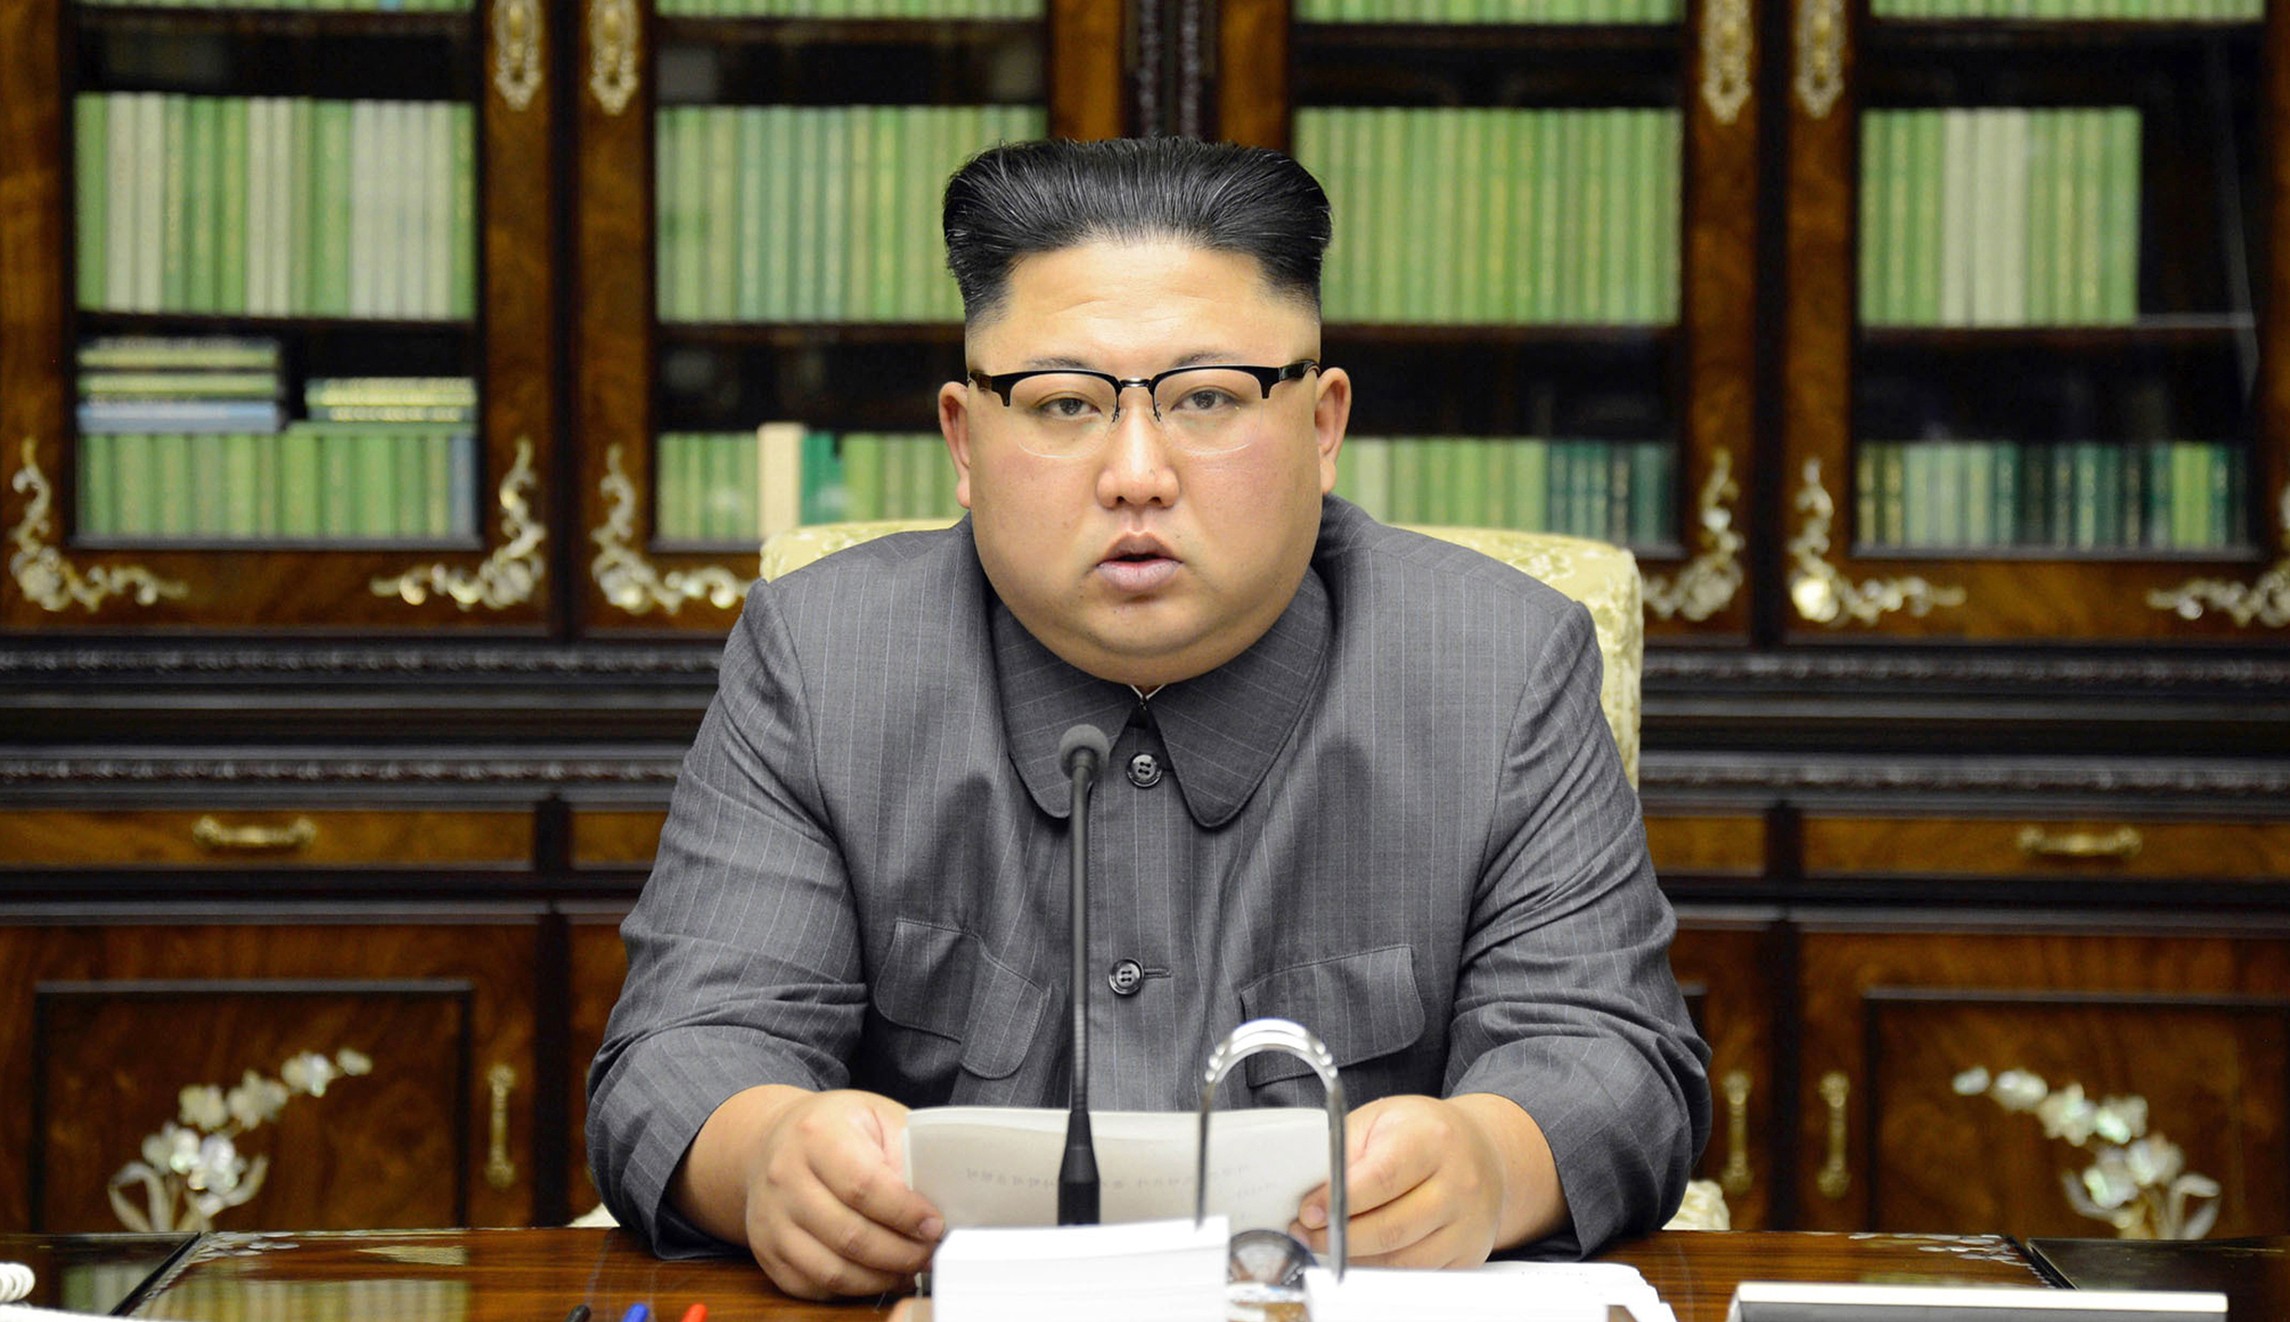 The New York Times' man in North Korea: Playing the role of ...